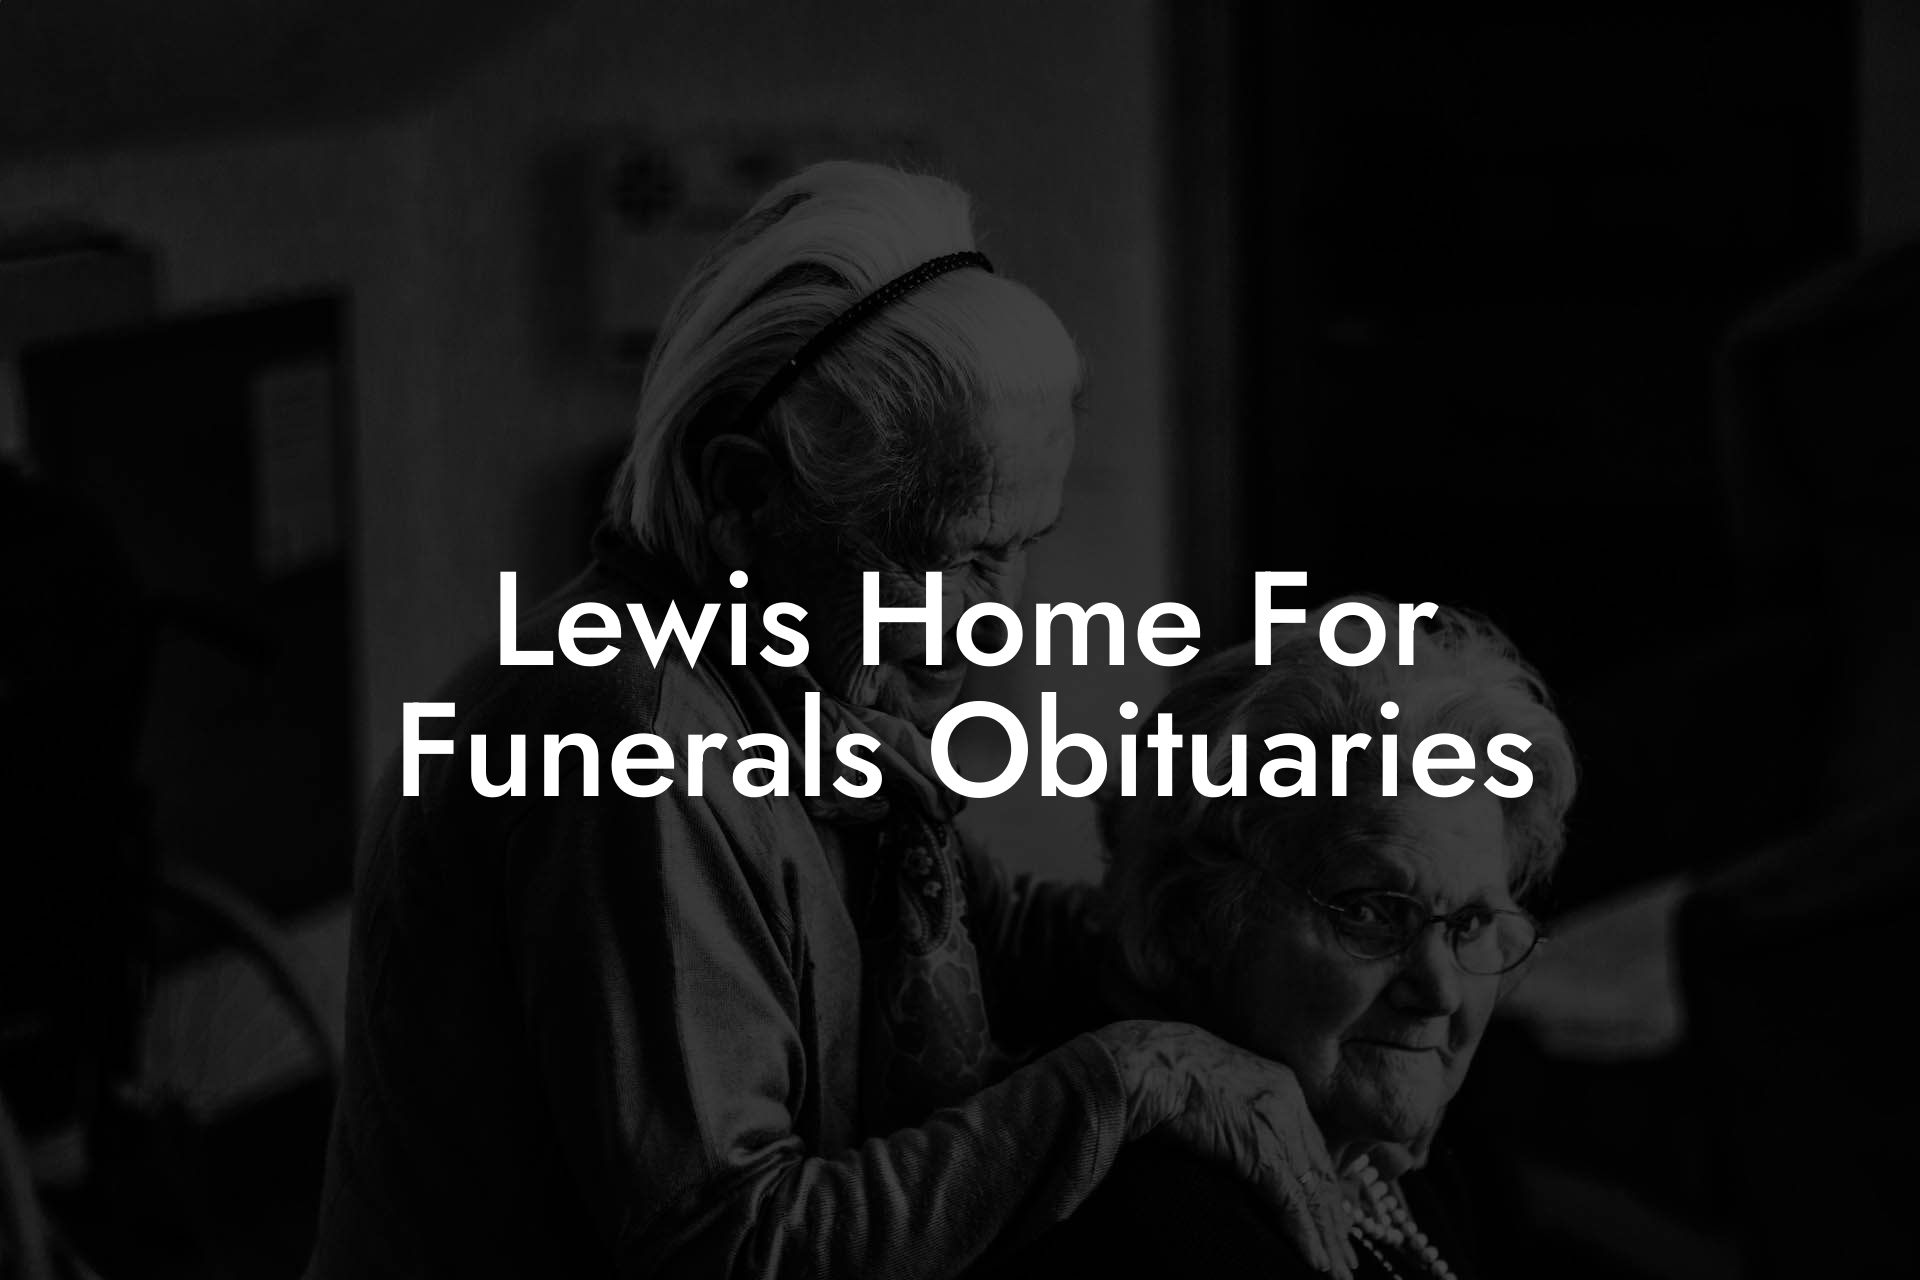 Lewis Home For Funerals Obituaries